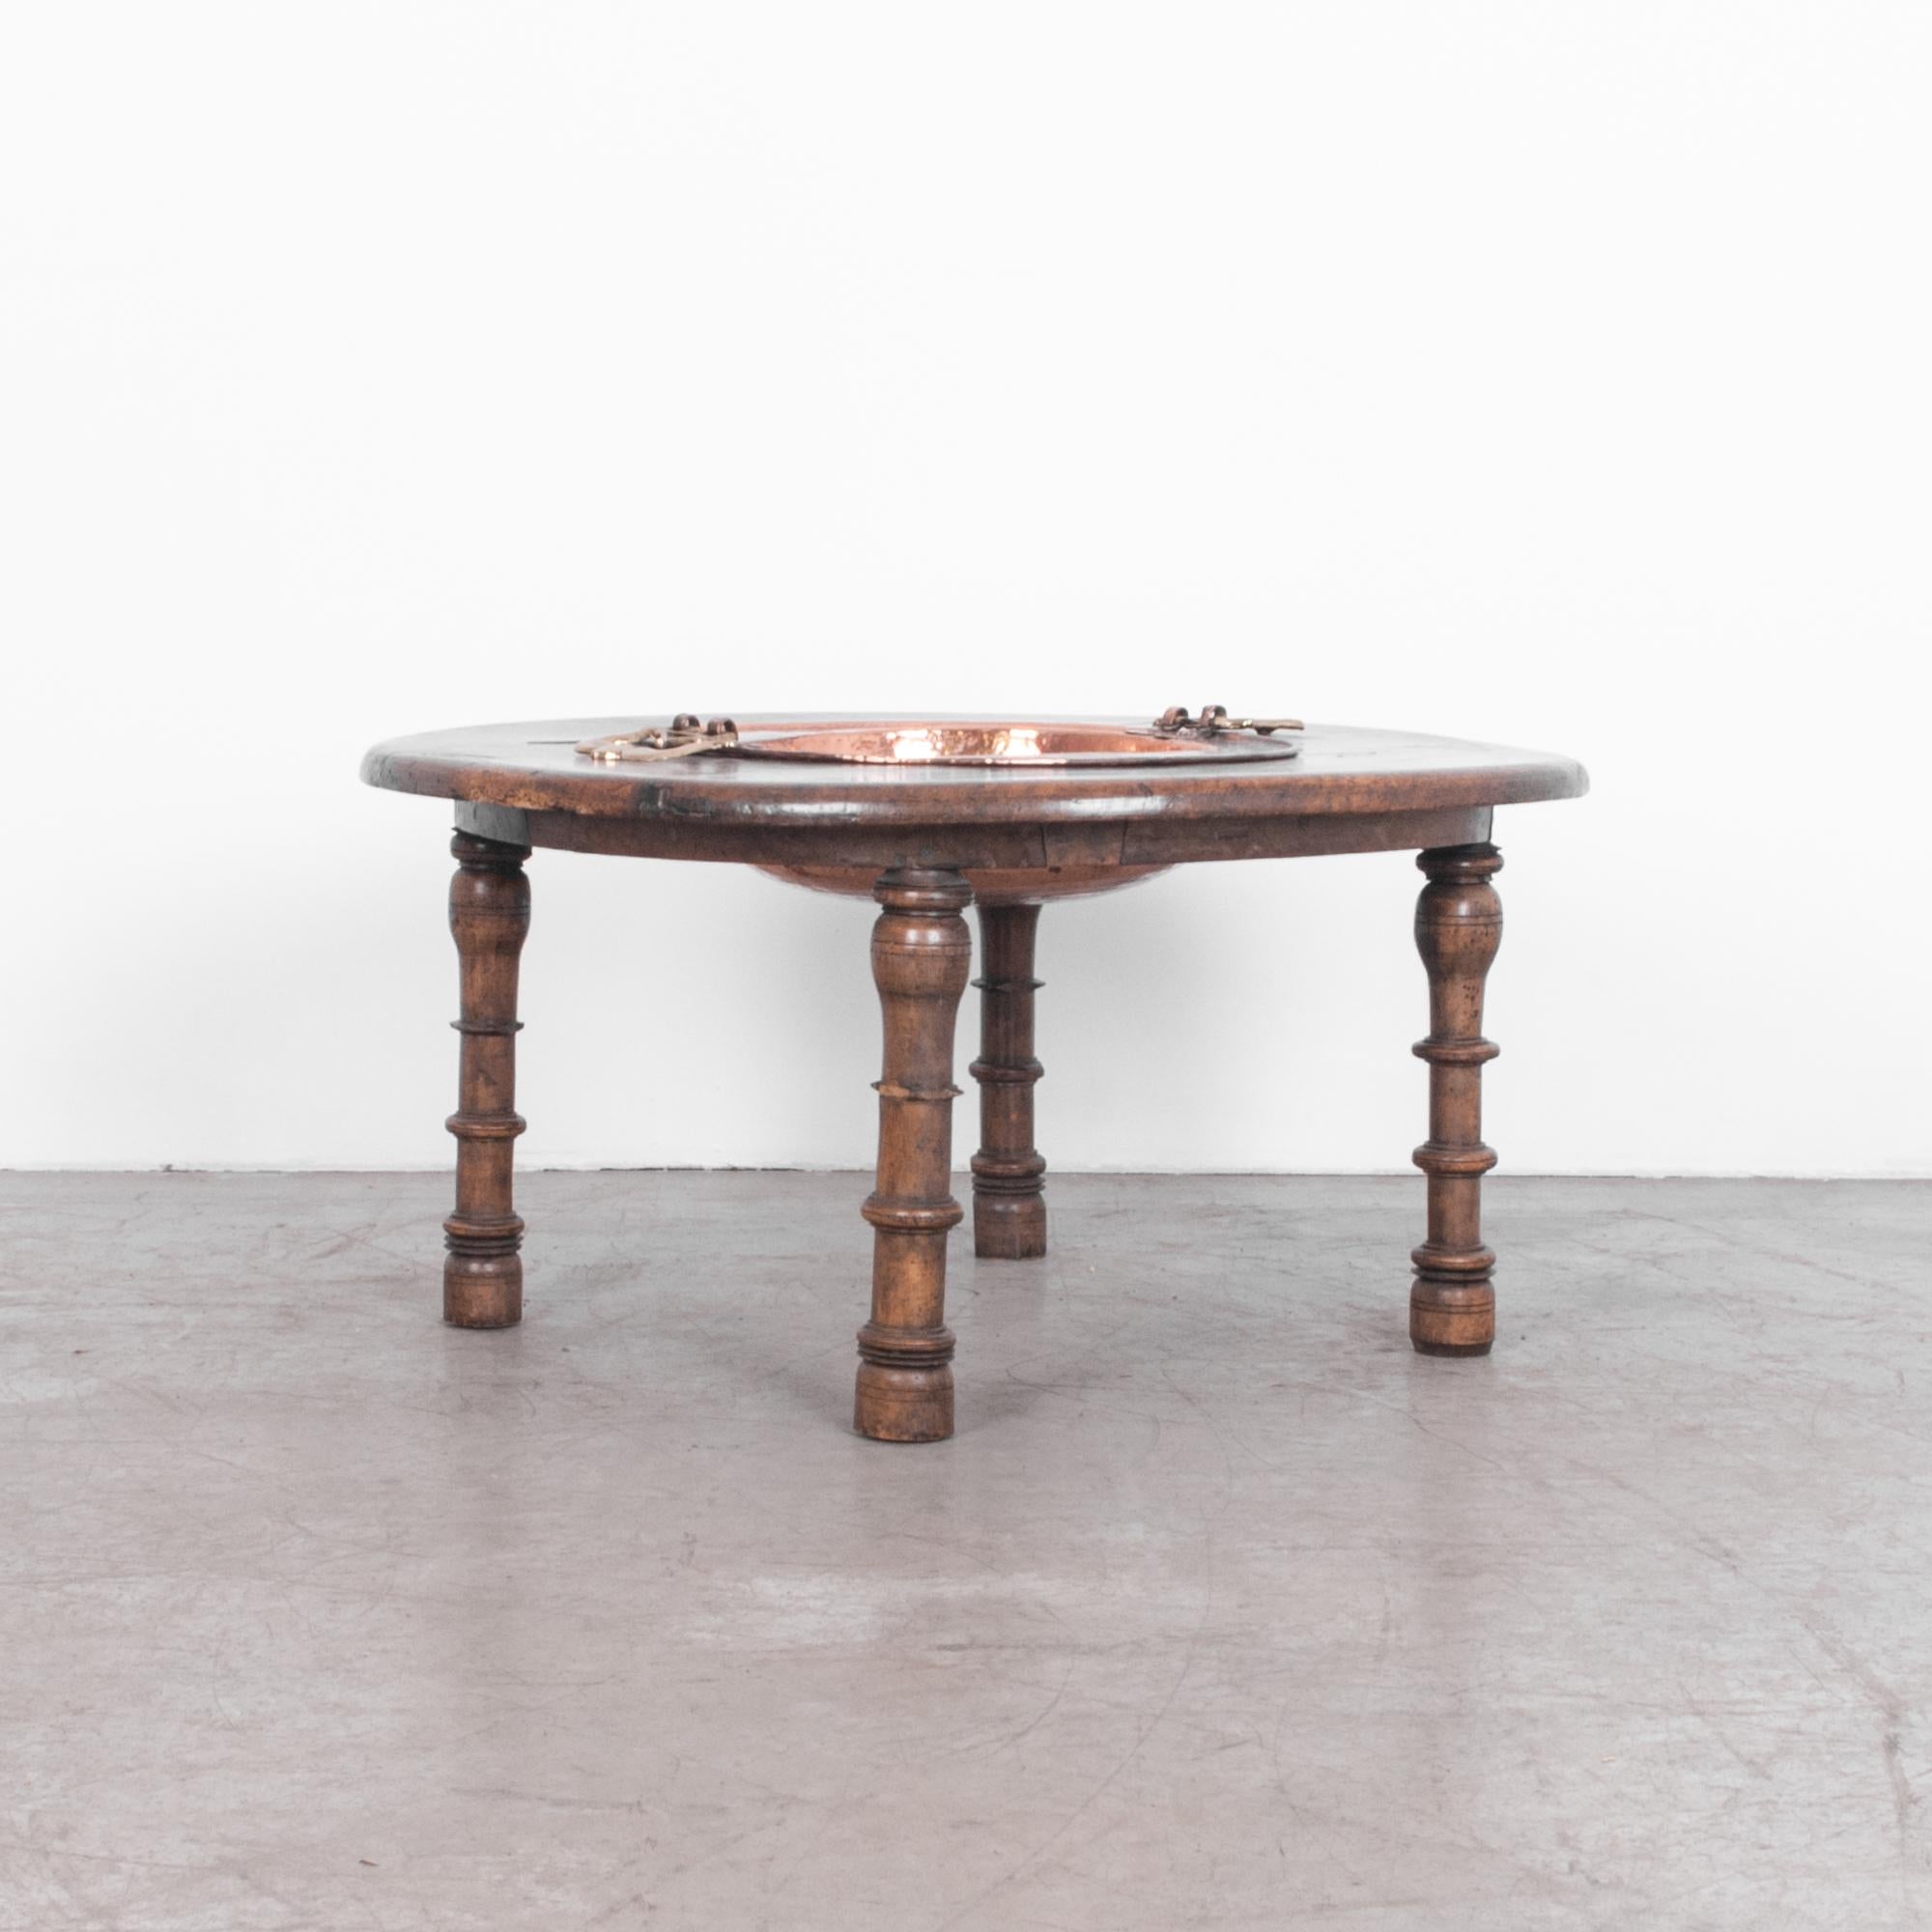 A late 19th  century Moroccan couscous table.  Couscous originates in North Africa, served as a house warming one pot dish, and a central part of life. With turned legs, rustic top, and removable hand beaten copper bowl, this is an exemplary